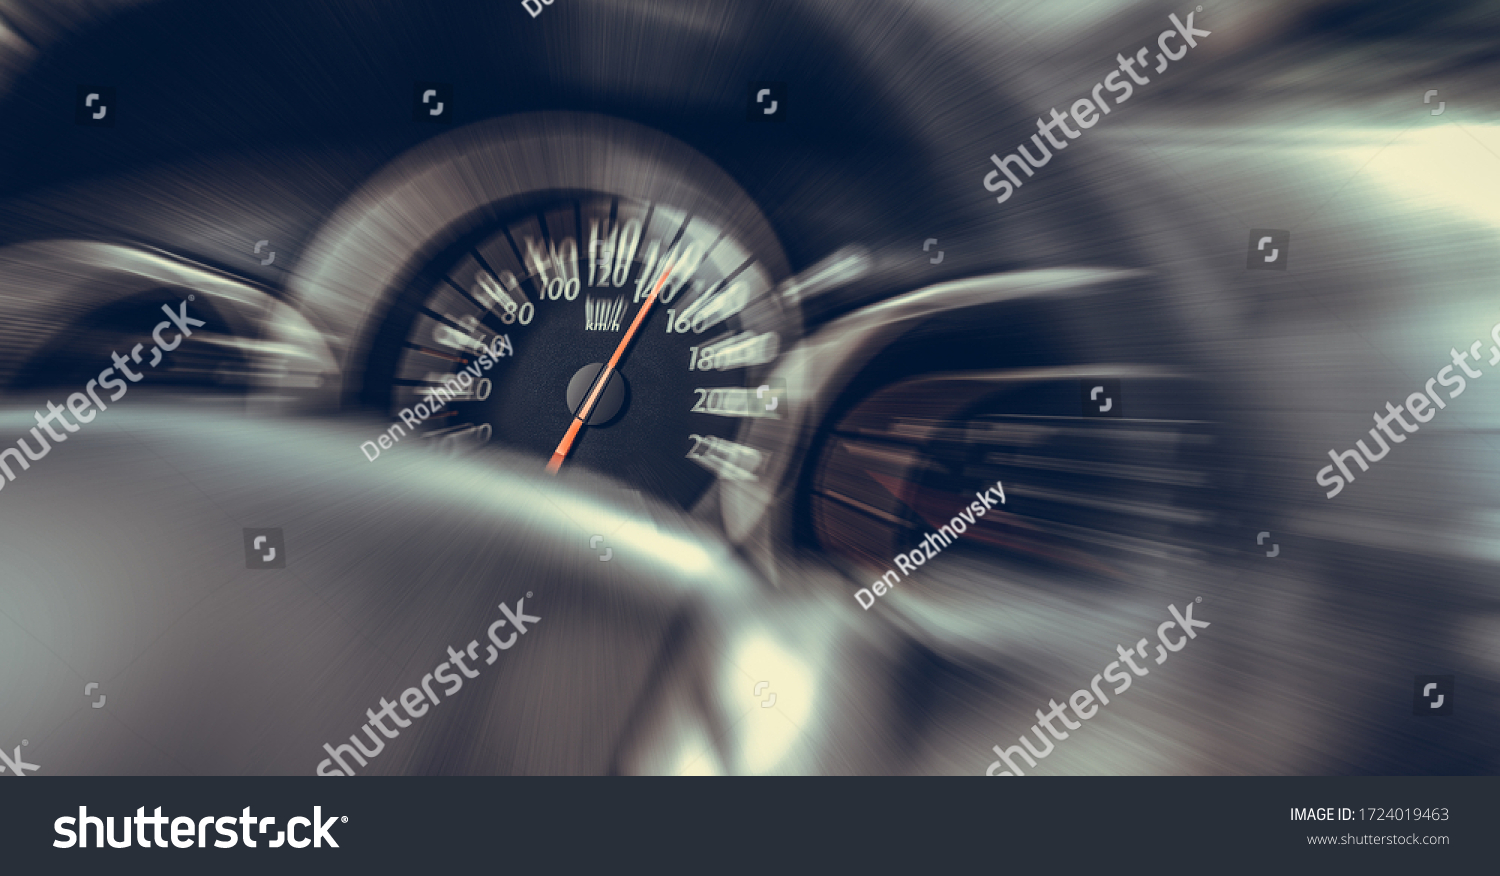 Car speedometer. High speed on a car speedometer and motion blur. #1724019463